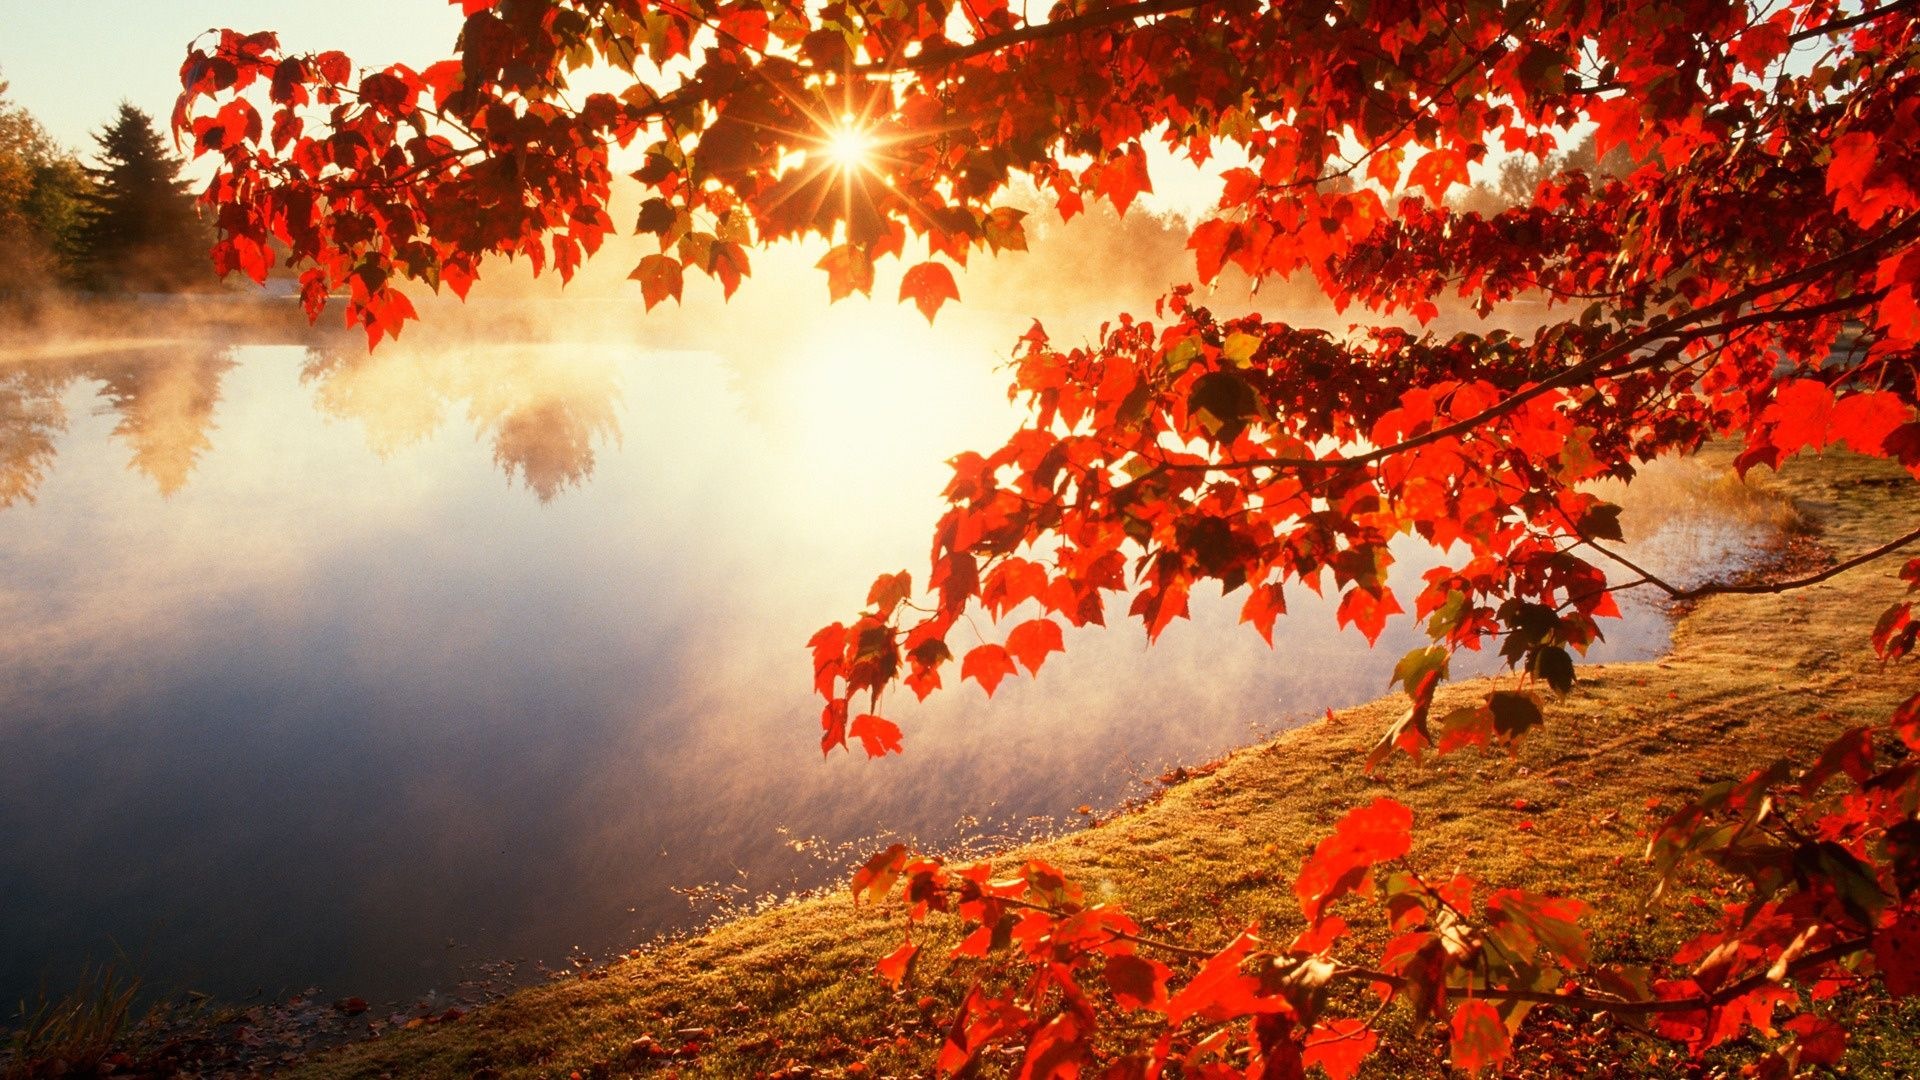 Autumn red leaves forest trees HD wallpaper #20 - 1920x1080